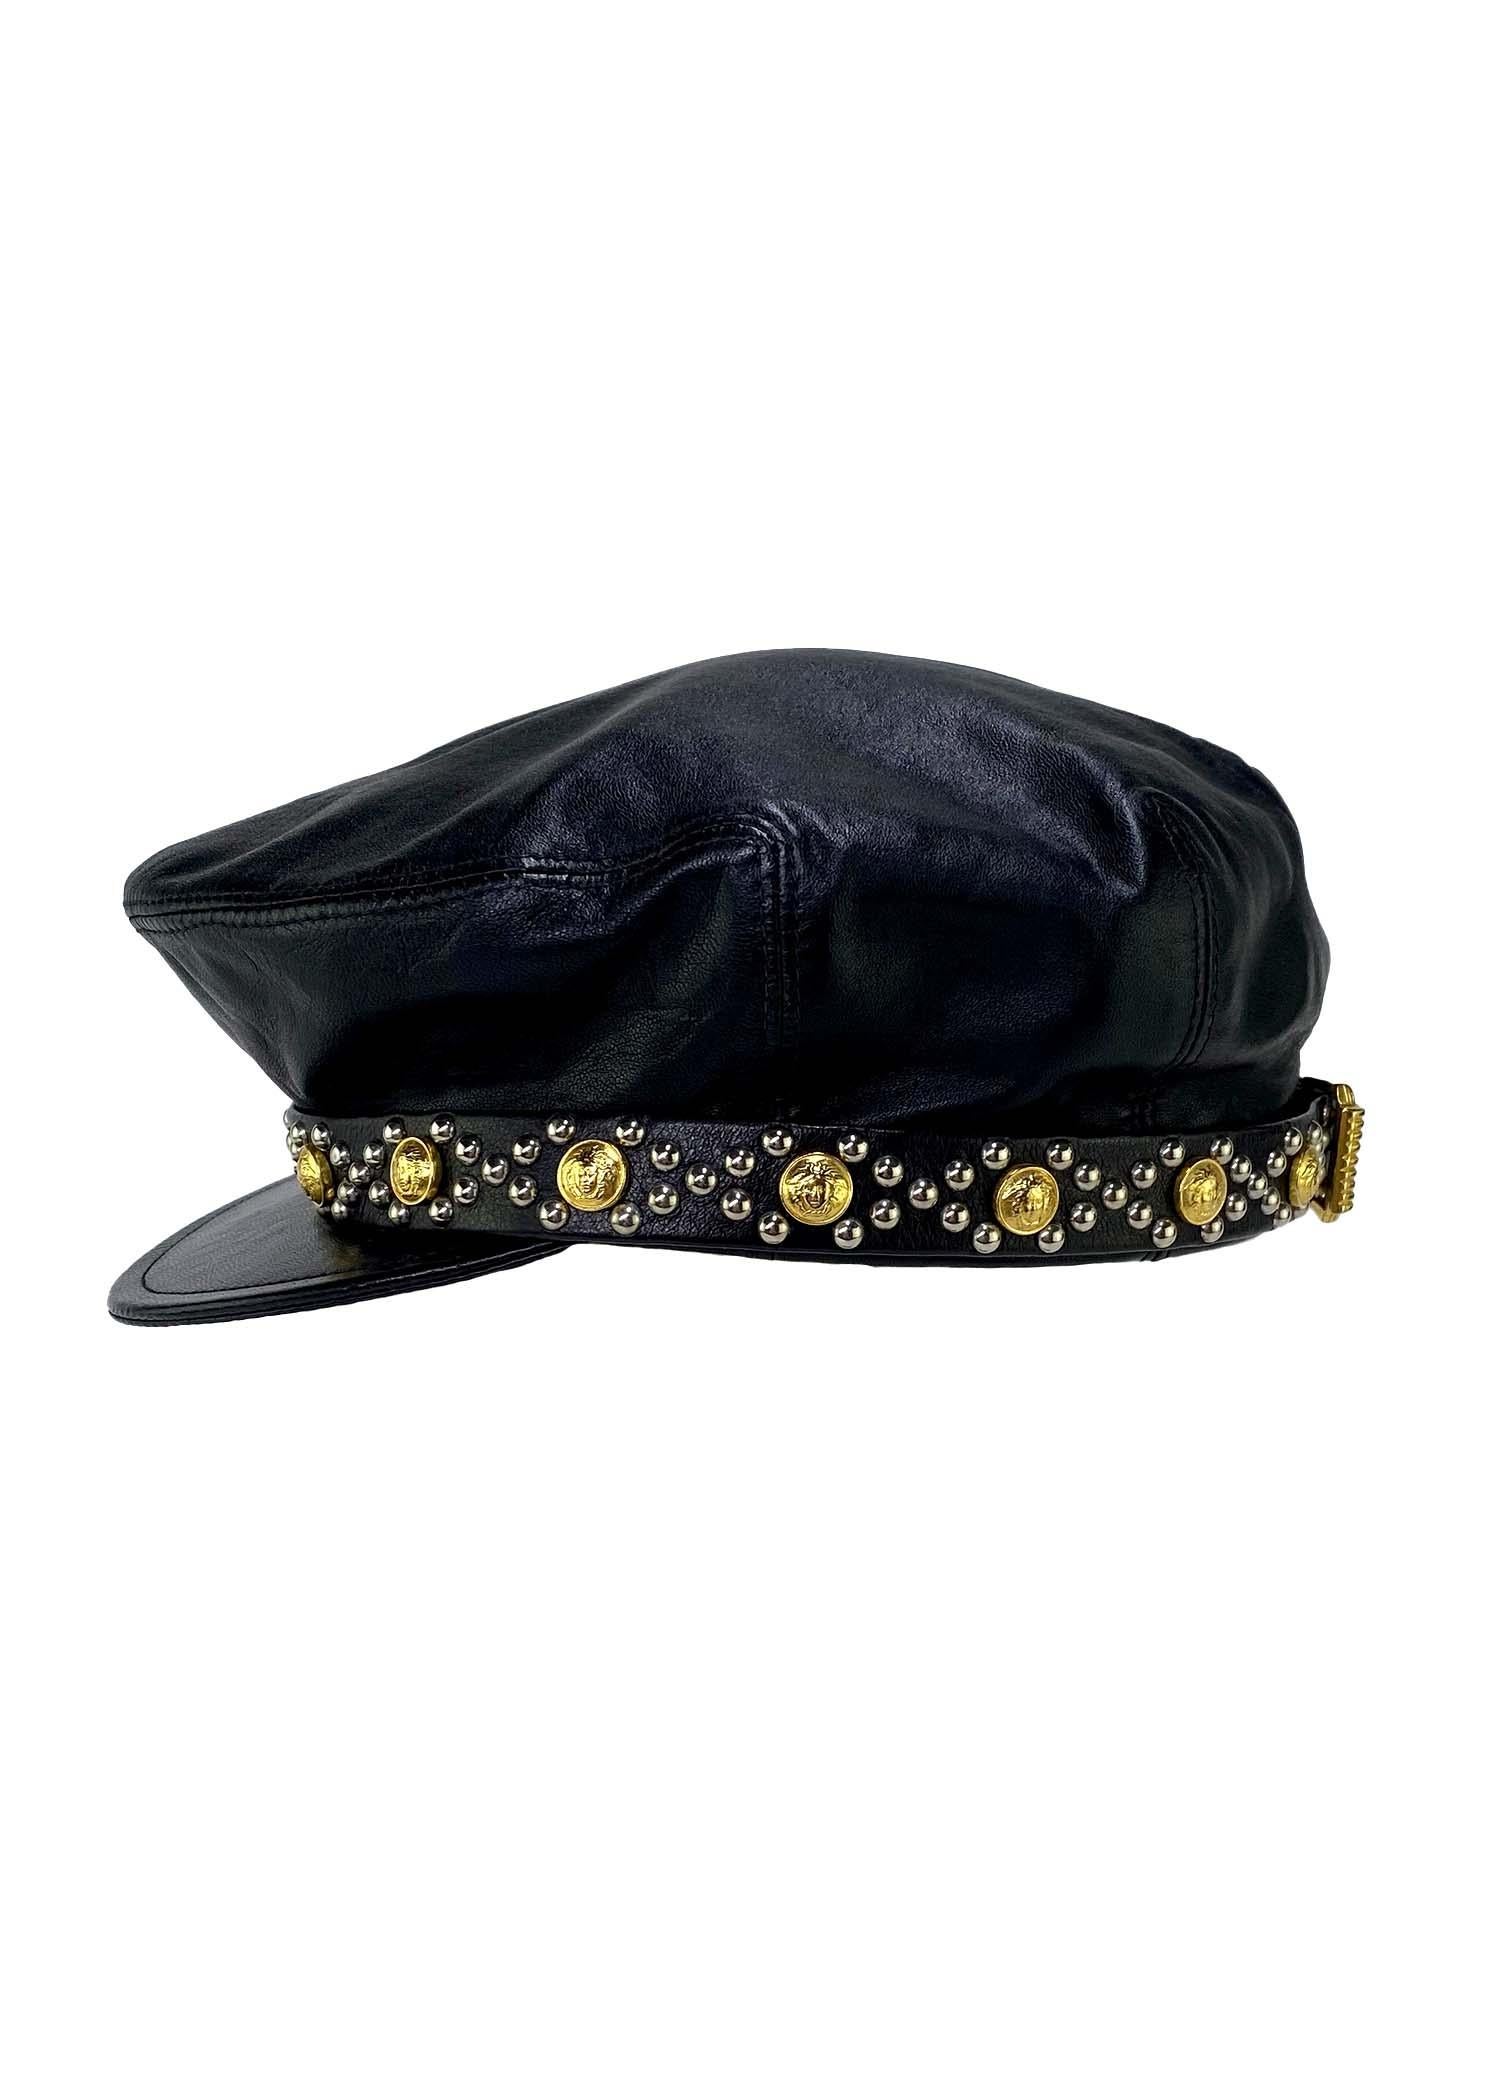 TheRealList presents: a rare leather hat designed by Gianni Versace for his Fall/Winter 1993 collection. This piece is constructed in supple black leather and features a small brim belt band. The silver studs surround gold medusa medallions in a